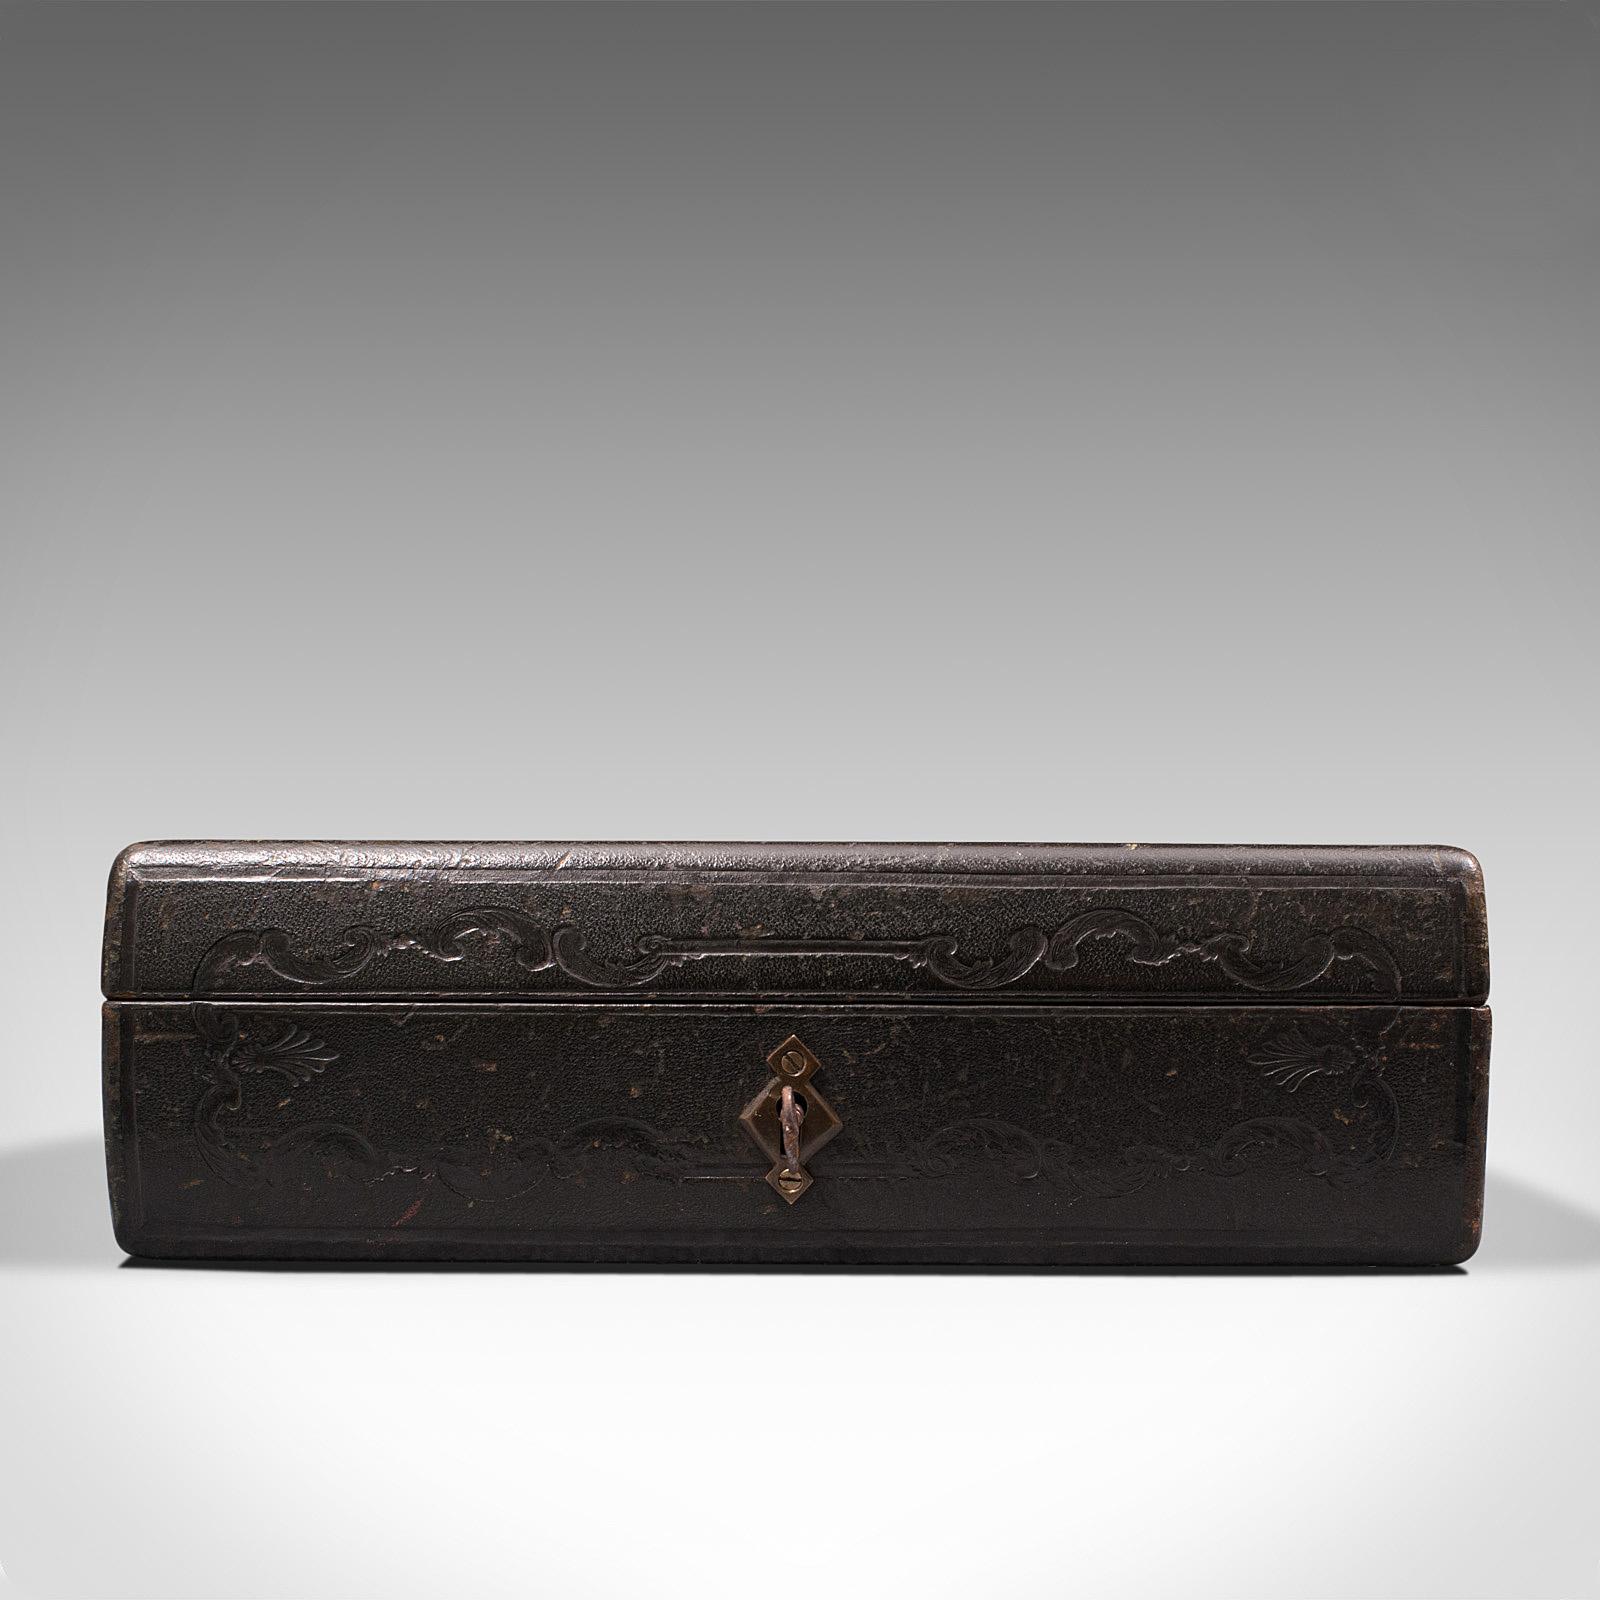 This is an antique merchant's writing slope. An English, leather bound correspondence box, dating to the late 19th century, circa 1890.

Fascinating, leather bound London merchant's writing box
Displaying a desirable aged patina and in good